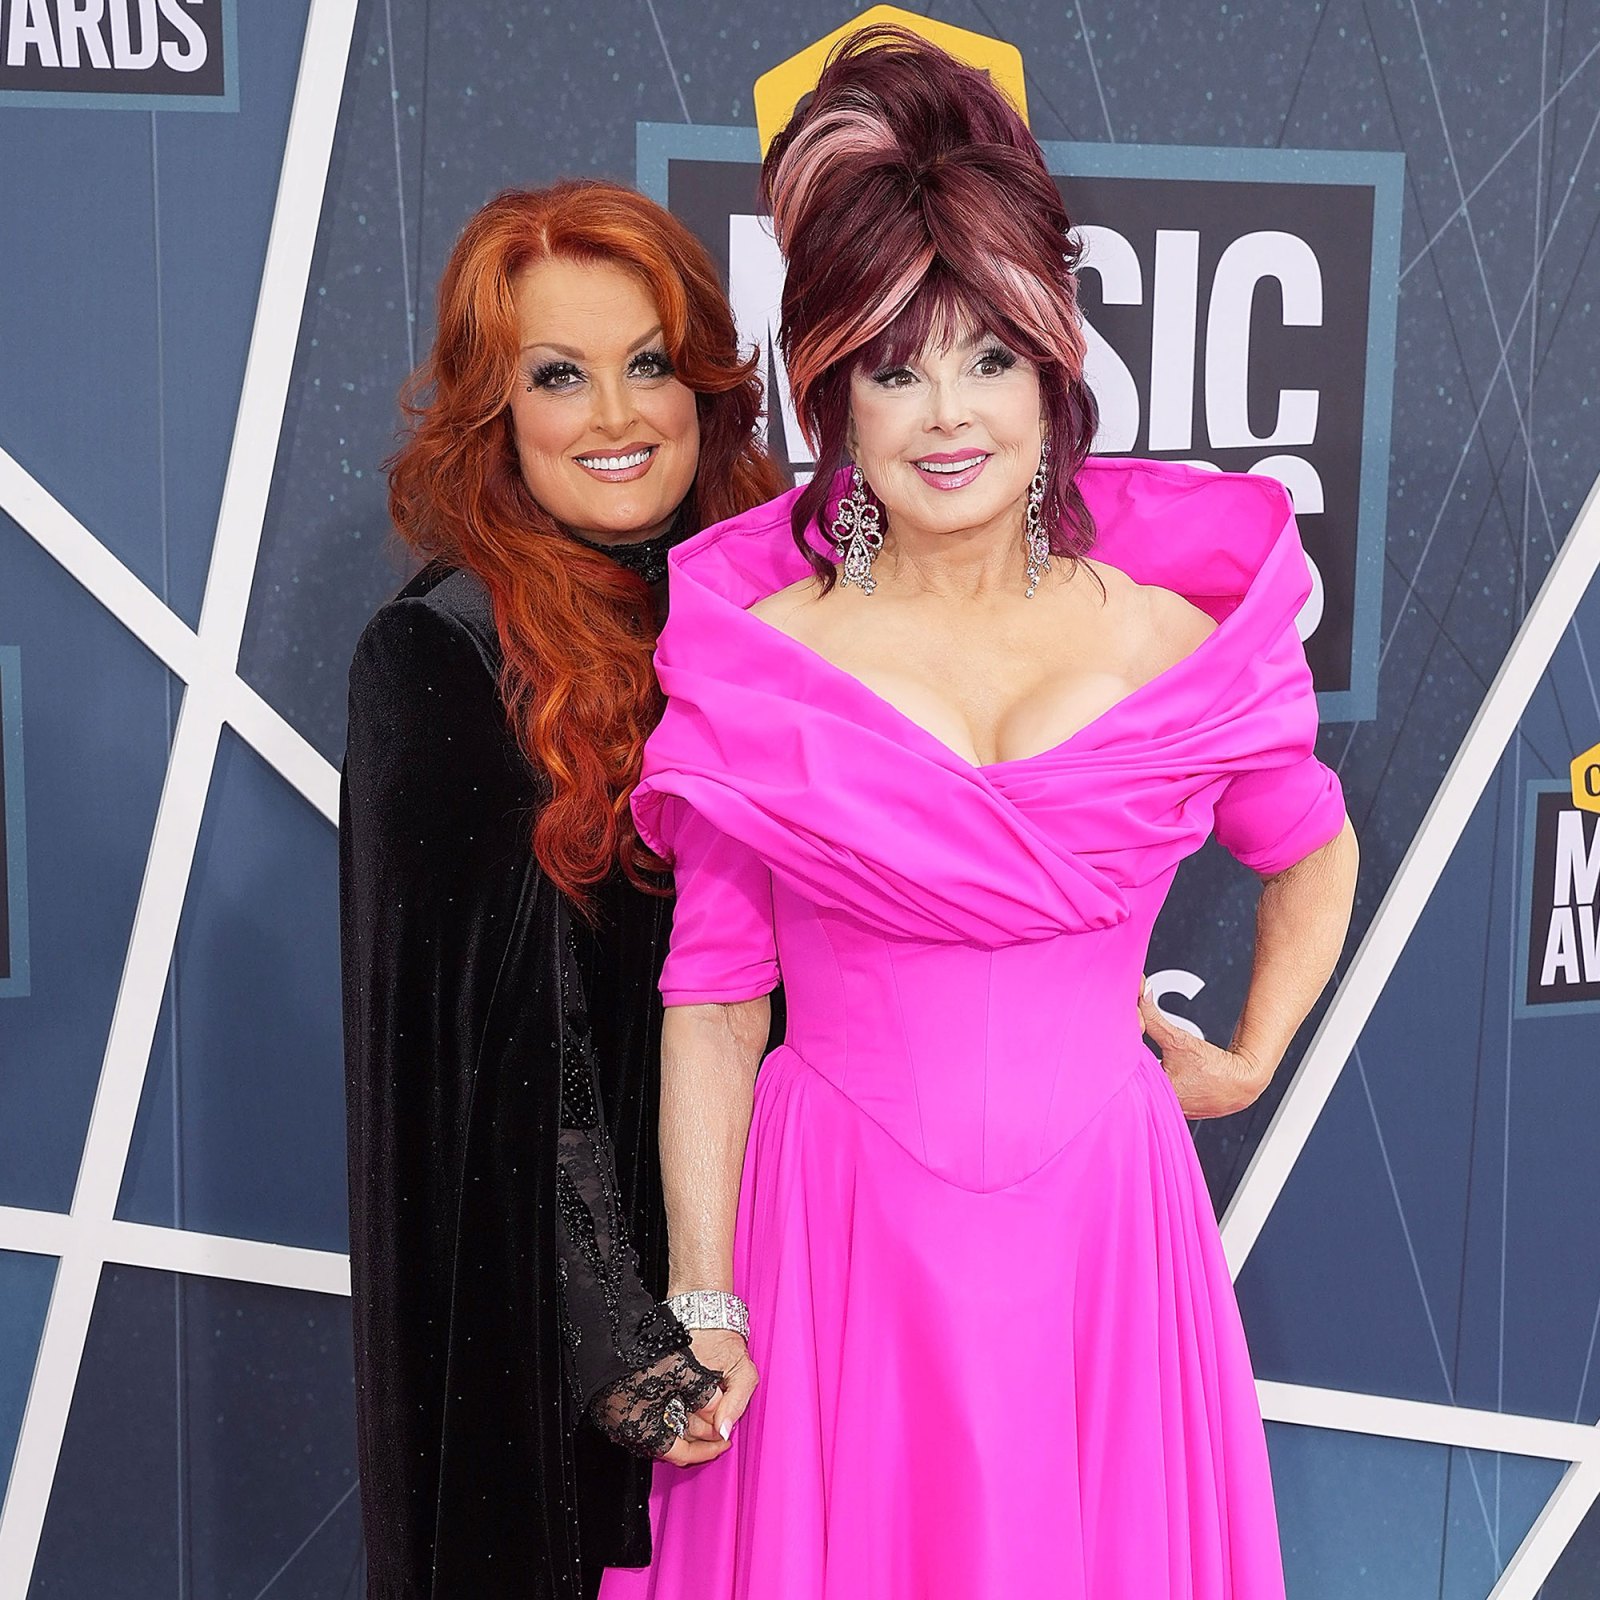 Honoring Legend Everything Know About Judds Final Tour Naomi Judd